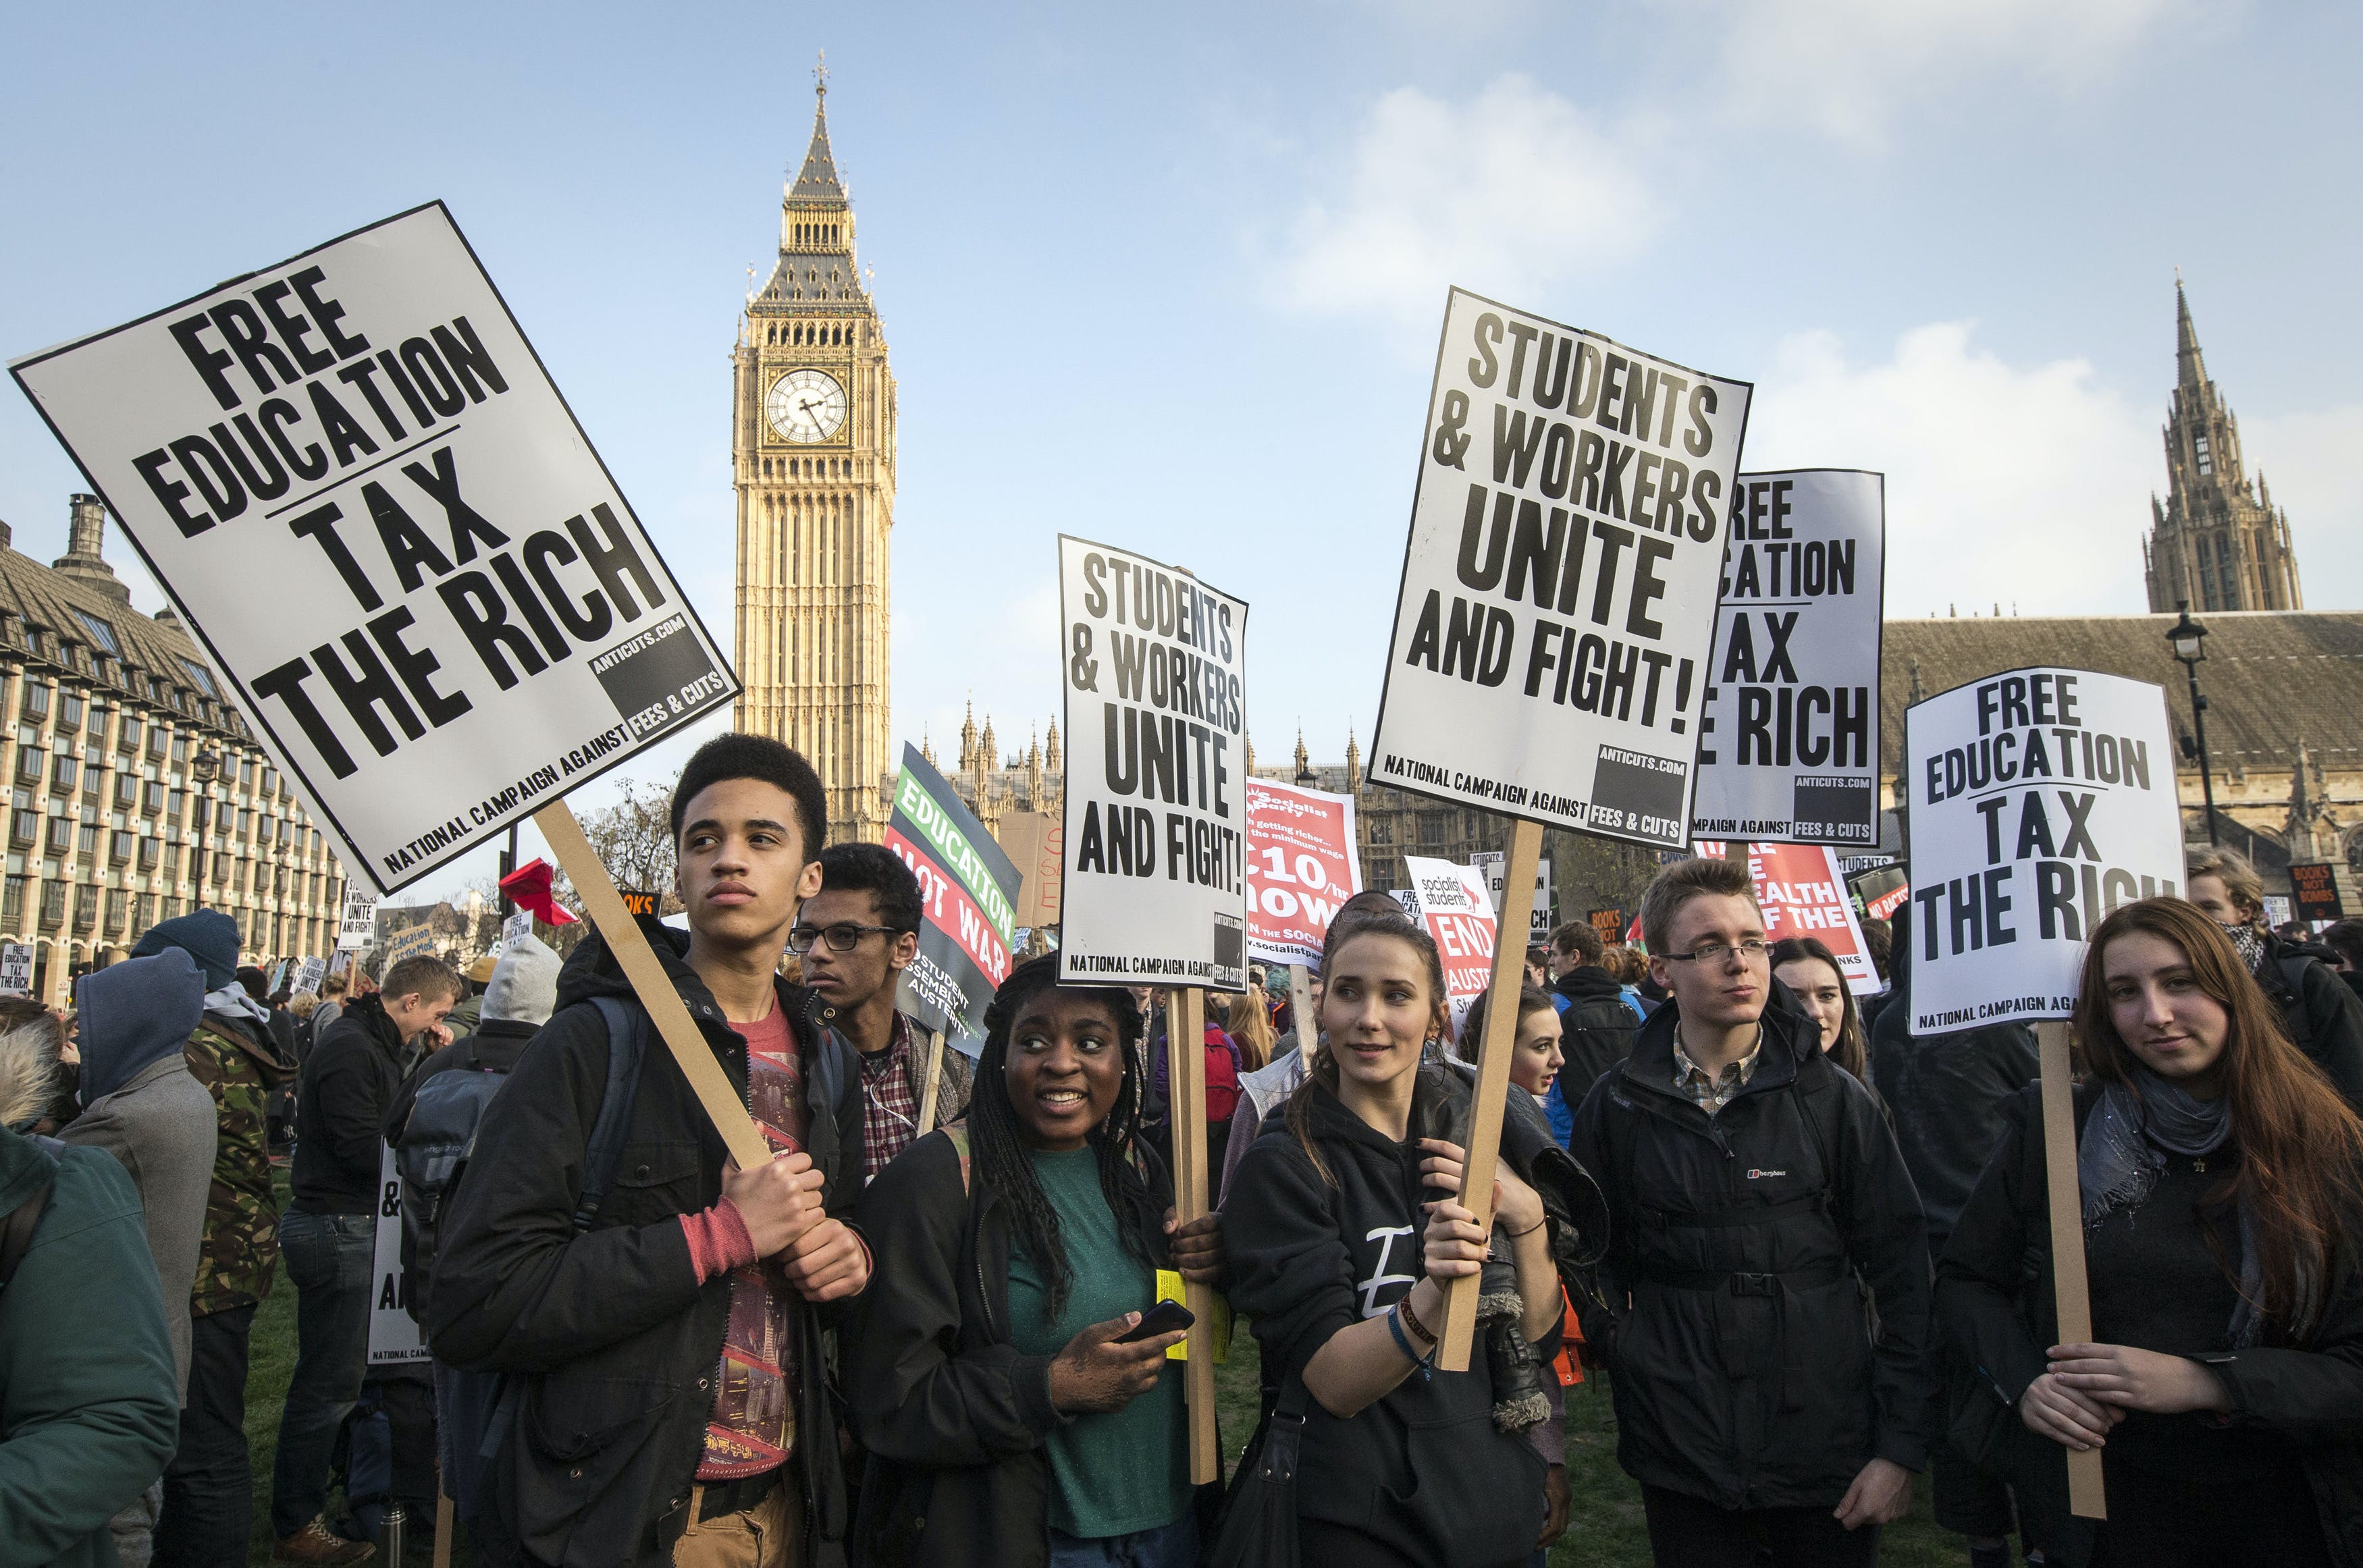 Demonstrators stand in Parliament Square in front of the Houses of Parliament during a protest against student loans and in favour of free education, in central London